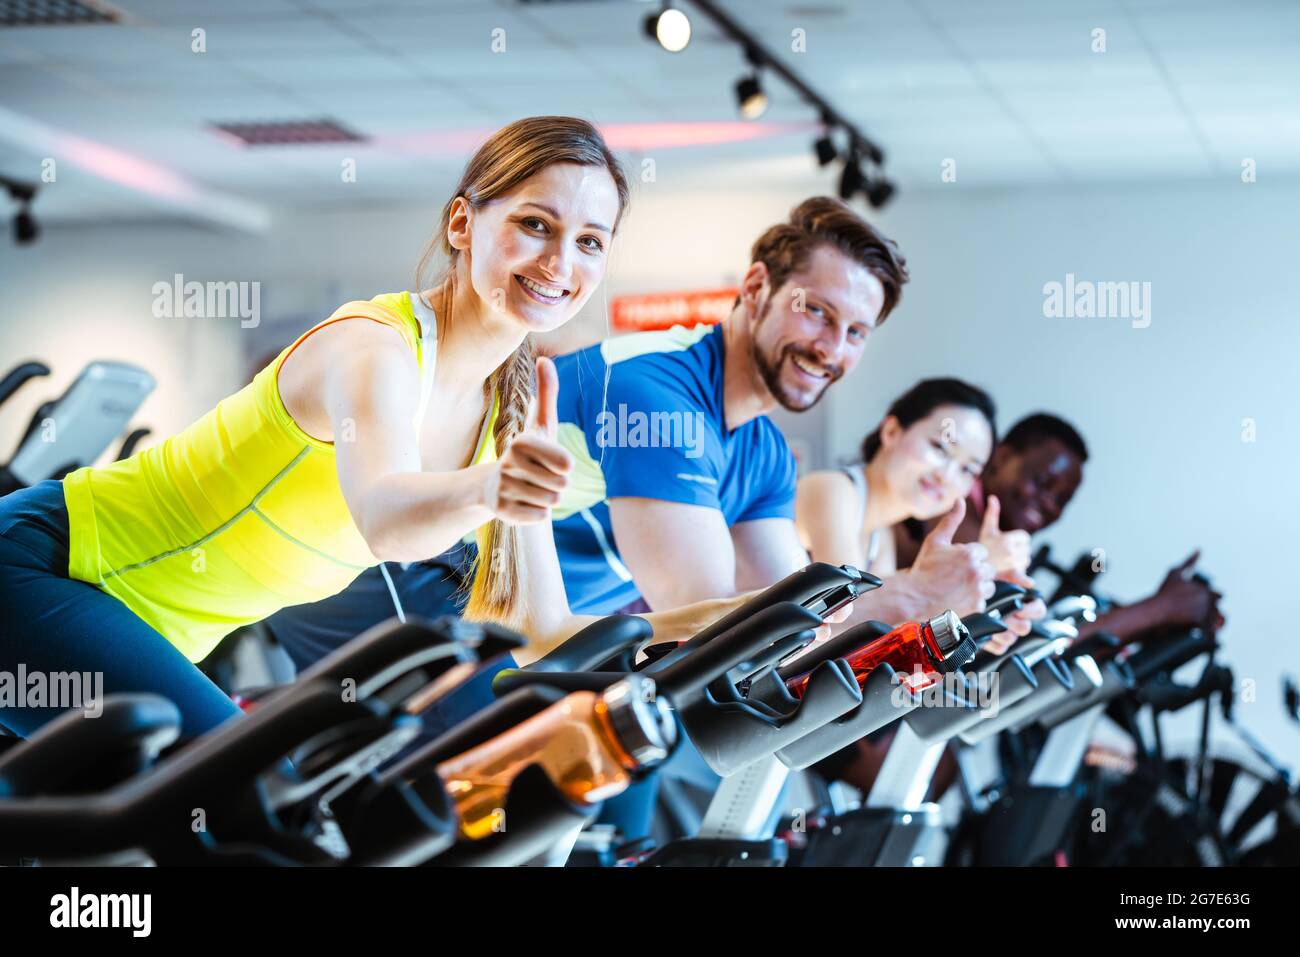 Woman showing thumbs up sign exercising of fitness bike in gym looking into camera Stock Photo